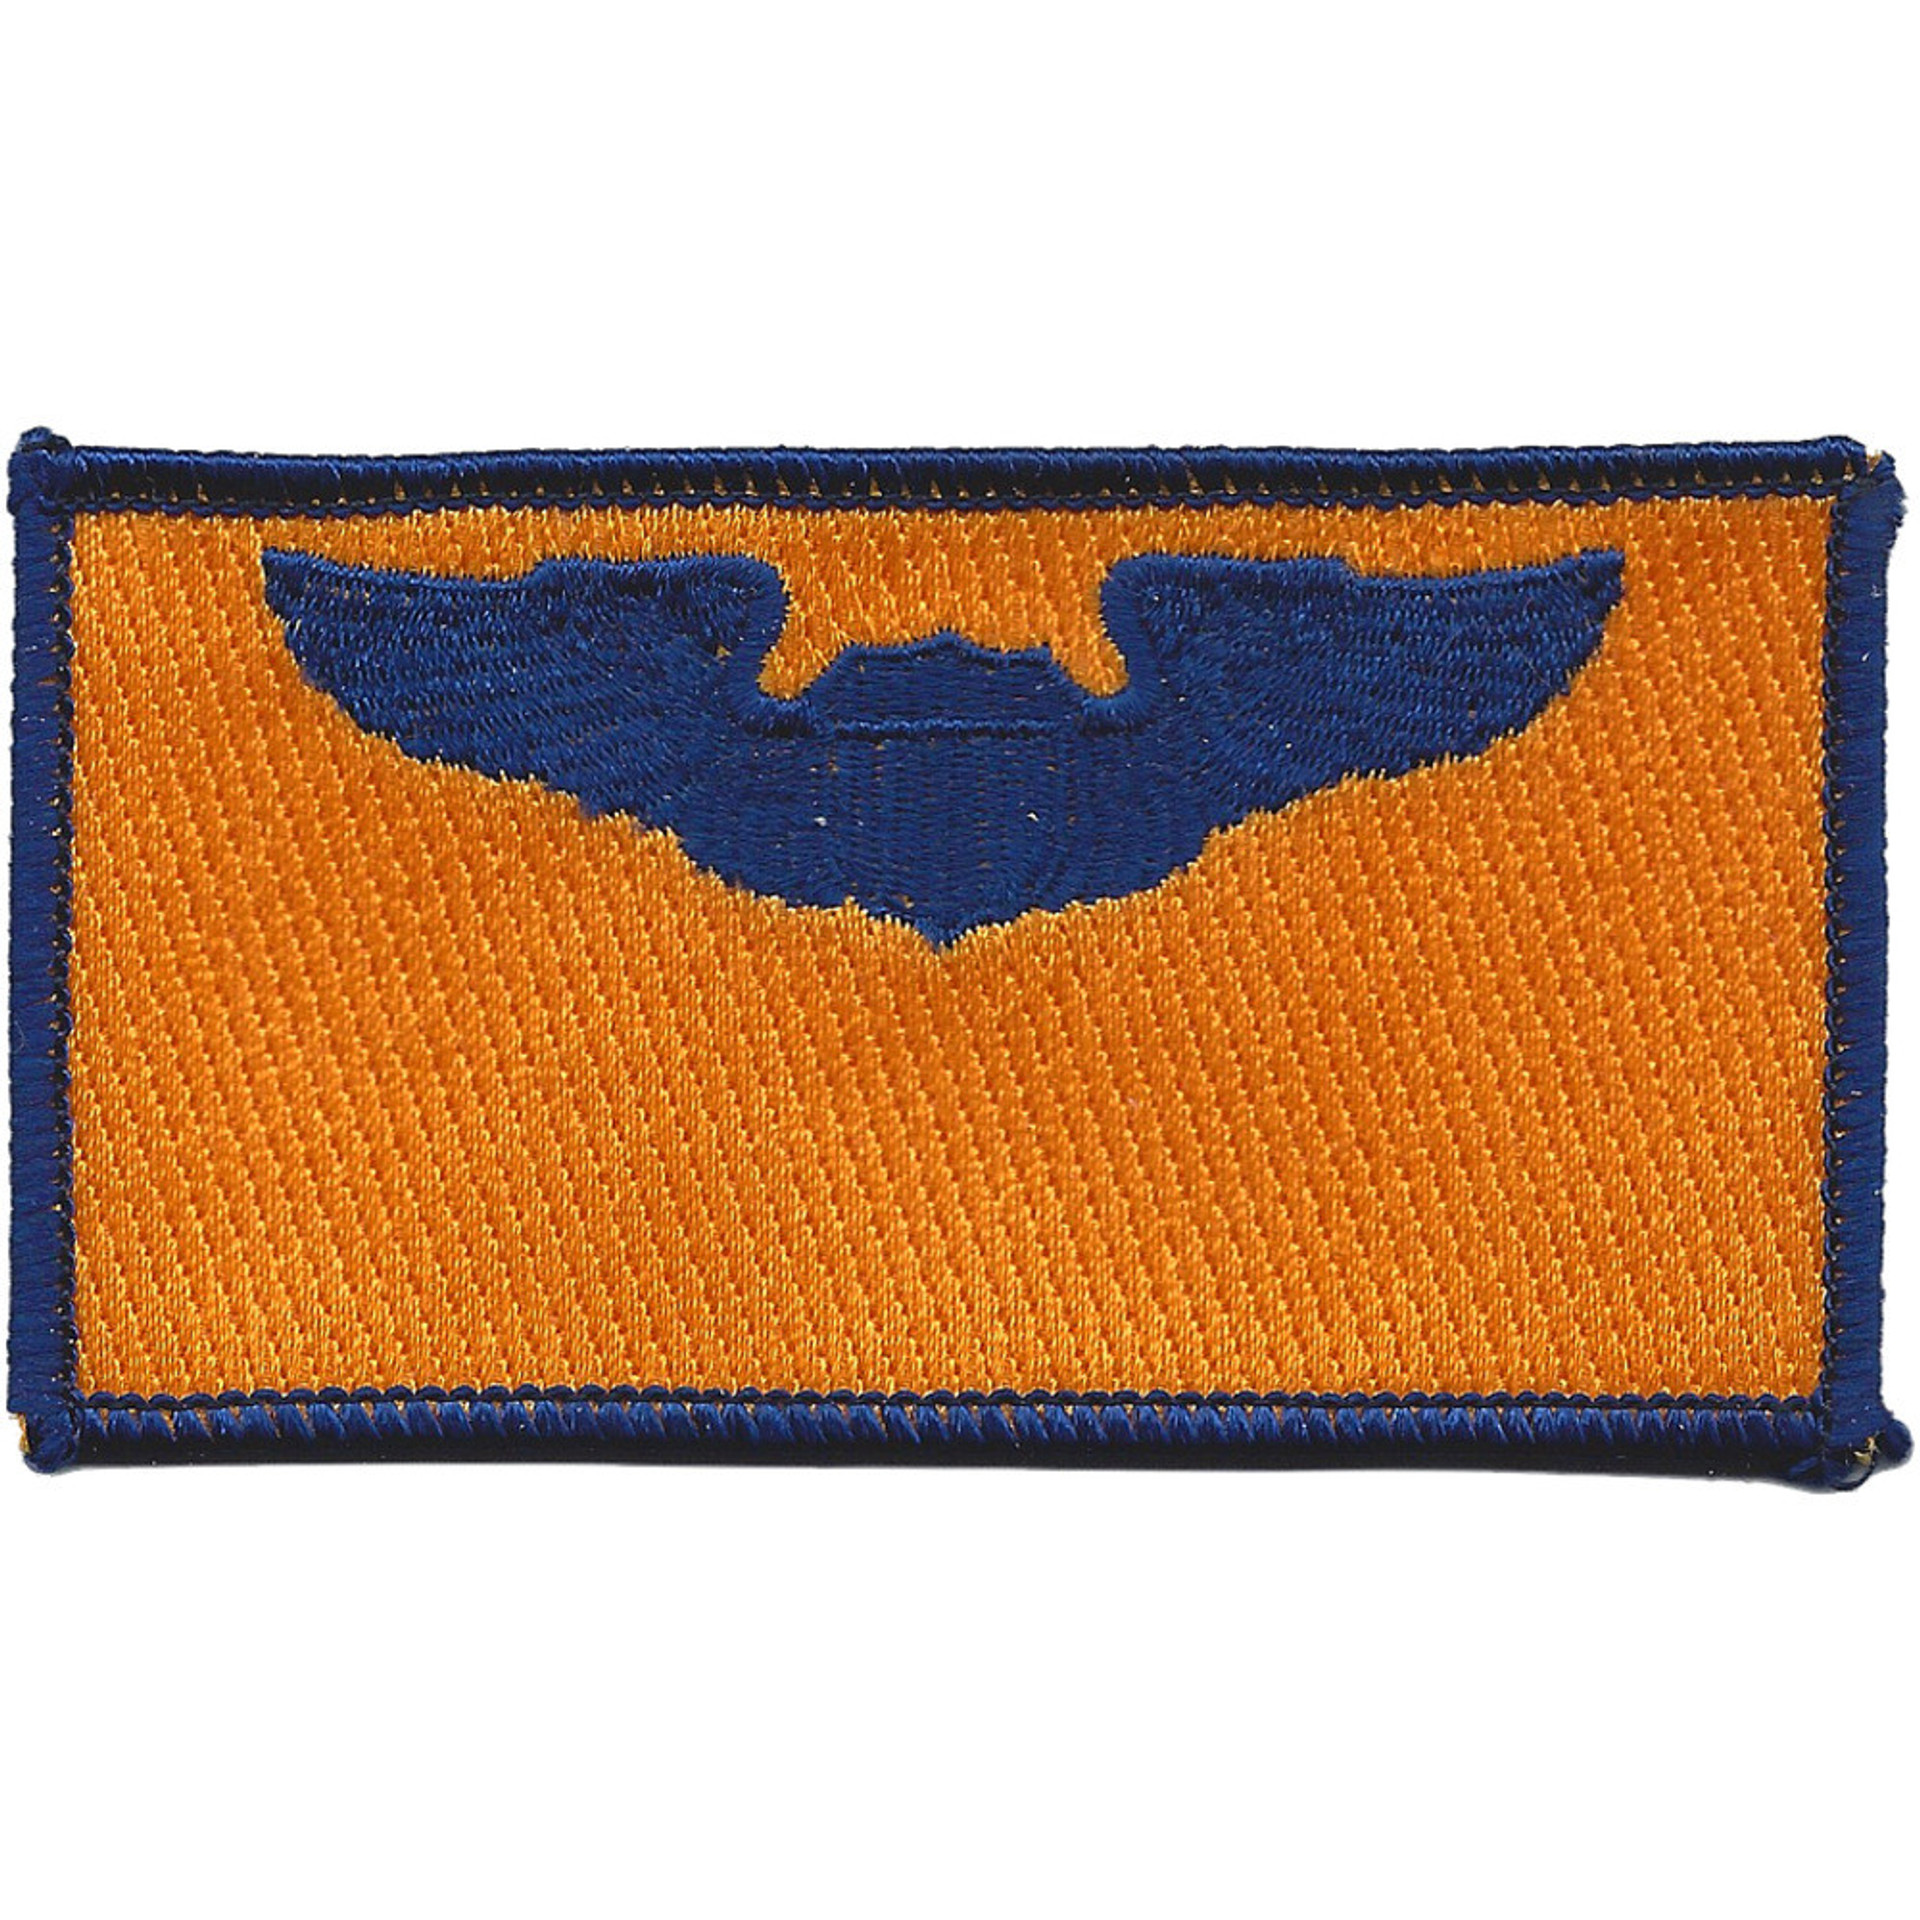 pilot-wings-air-force-name-patch-blue-and-gold-specialty-patches-air-force-patches-popular